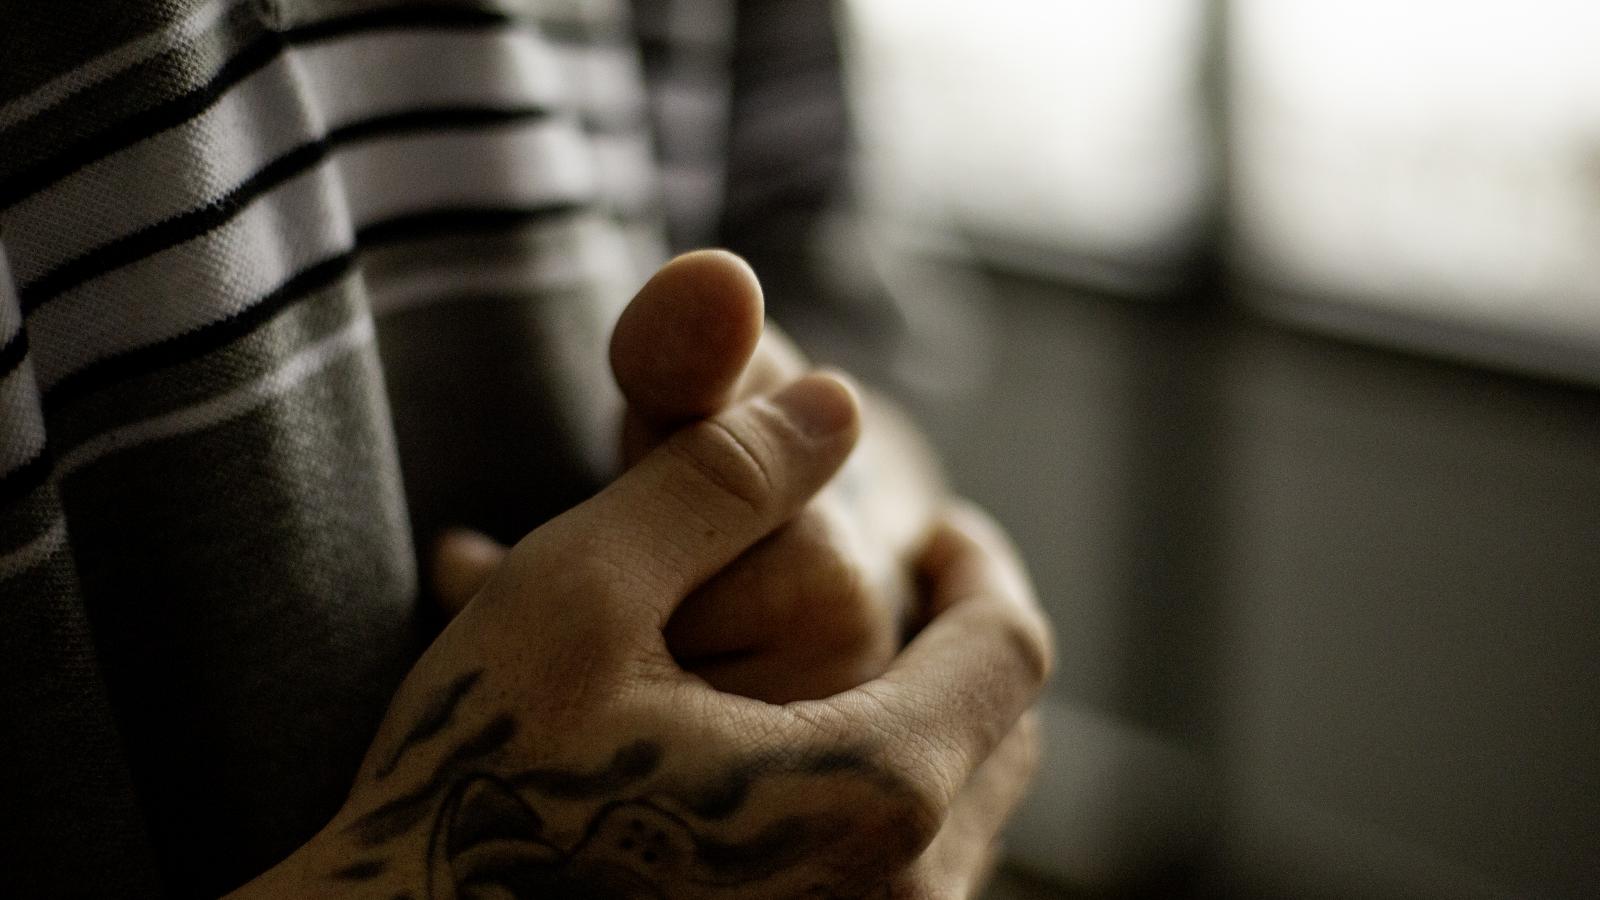 Close-up of a young person's hands